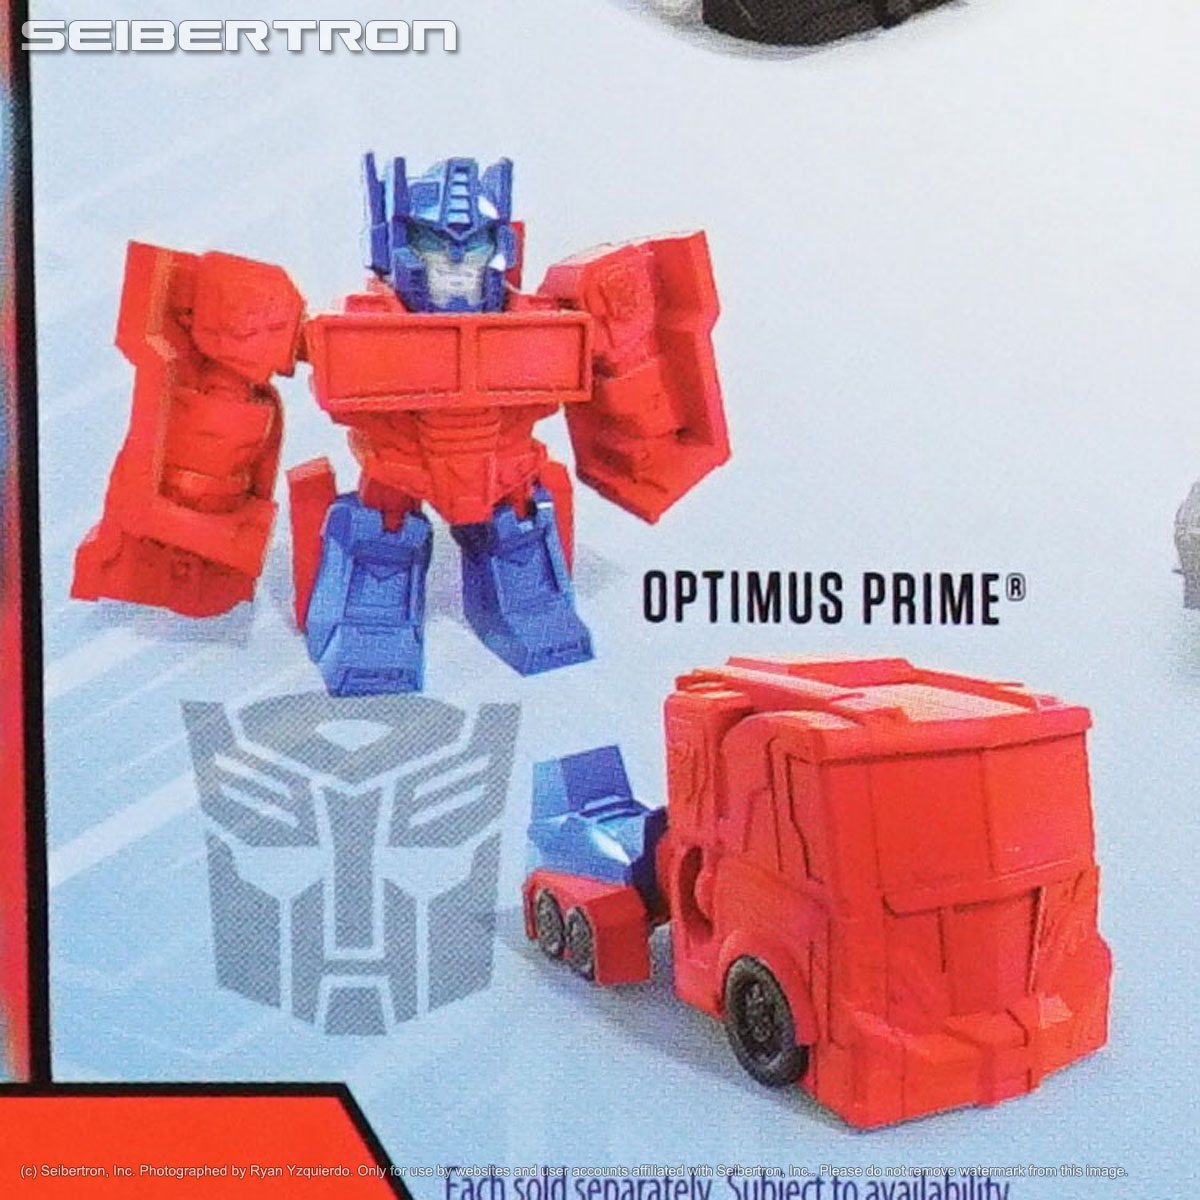 OPTIMUS PRIME Transformers Cyberverse Tiny Turbo Changers Series 1 2019 New